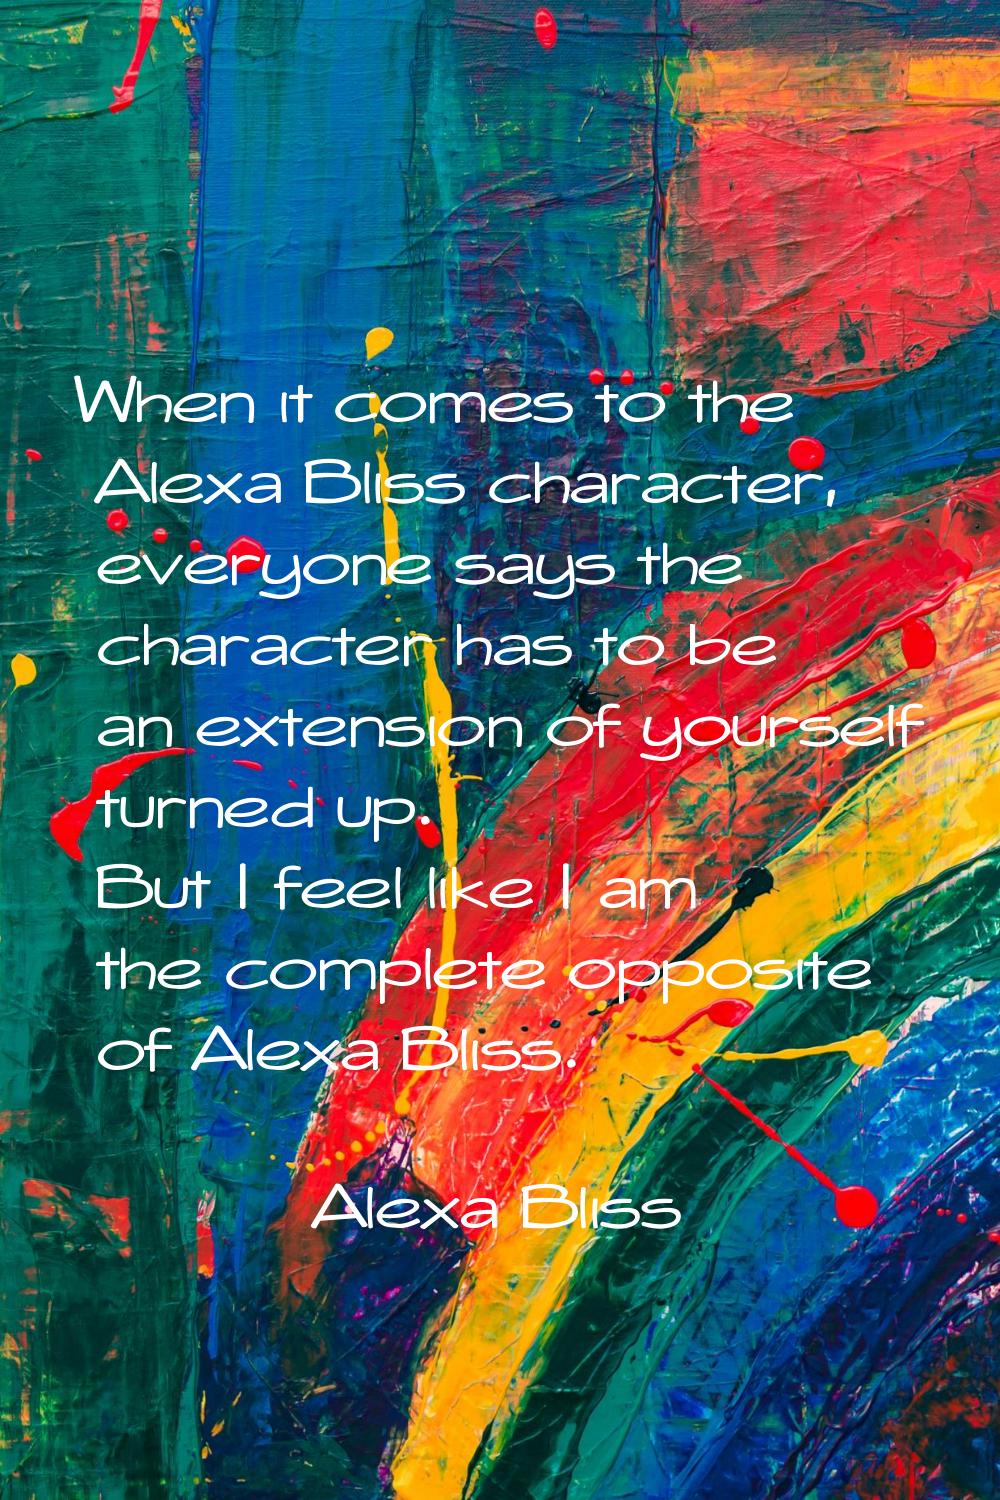 When it comes to the Alexa Bliss character, everyone says the character has to be an extension of y